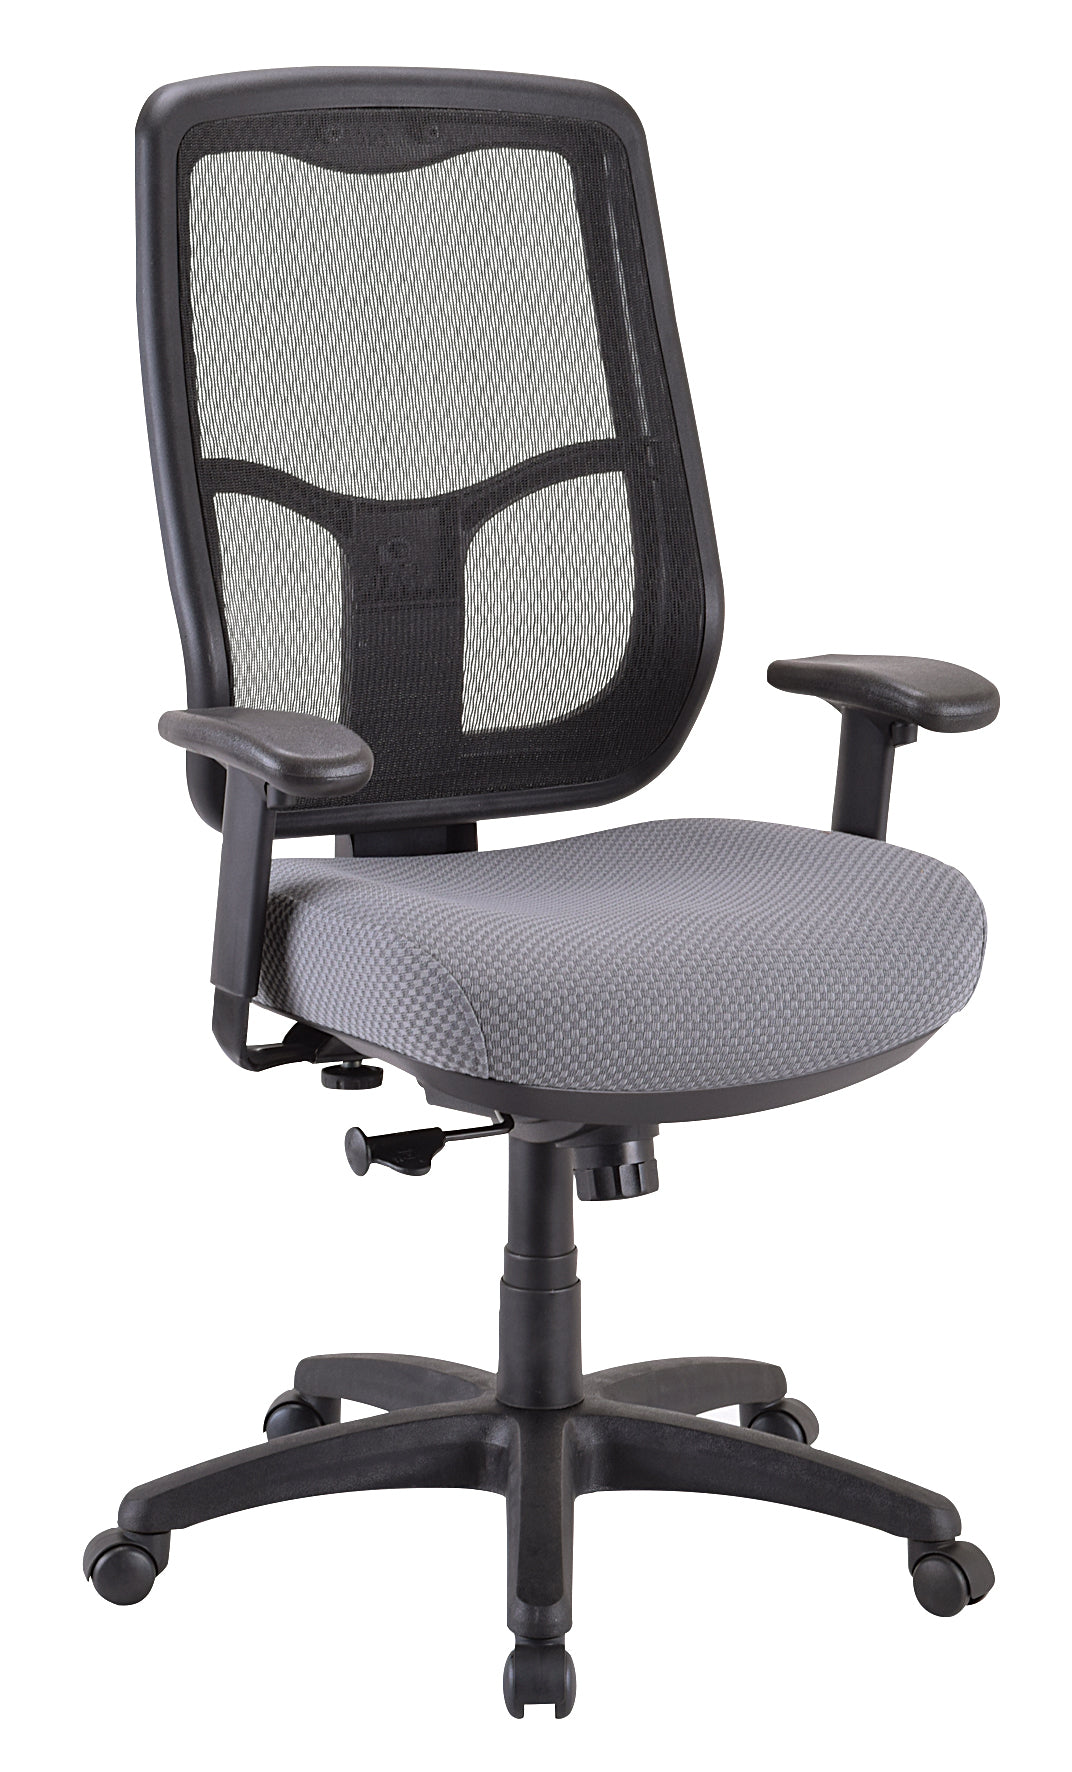 TEMPUR®-944 Office Chair: Everyday Comfort, Elevated